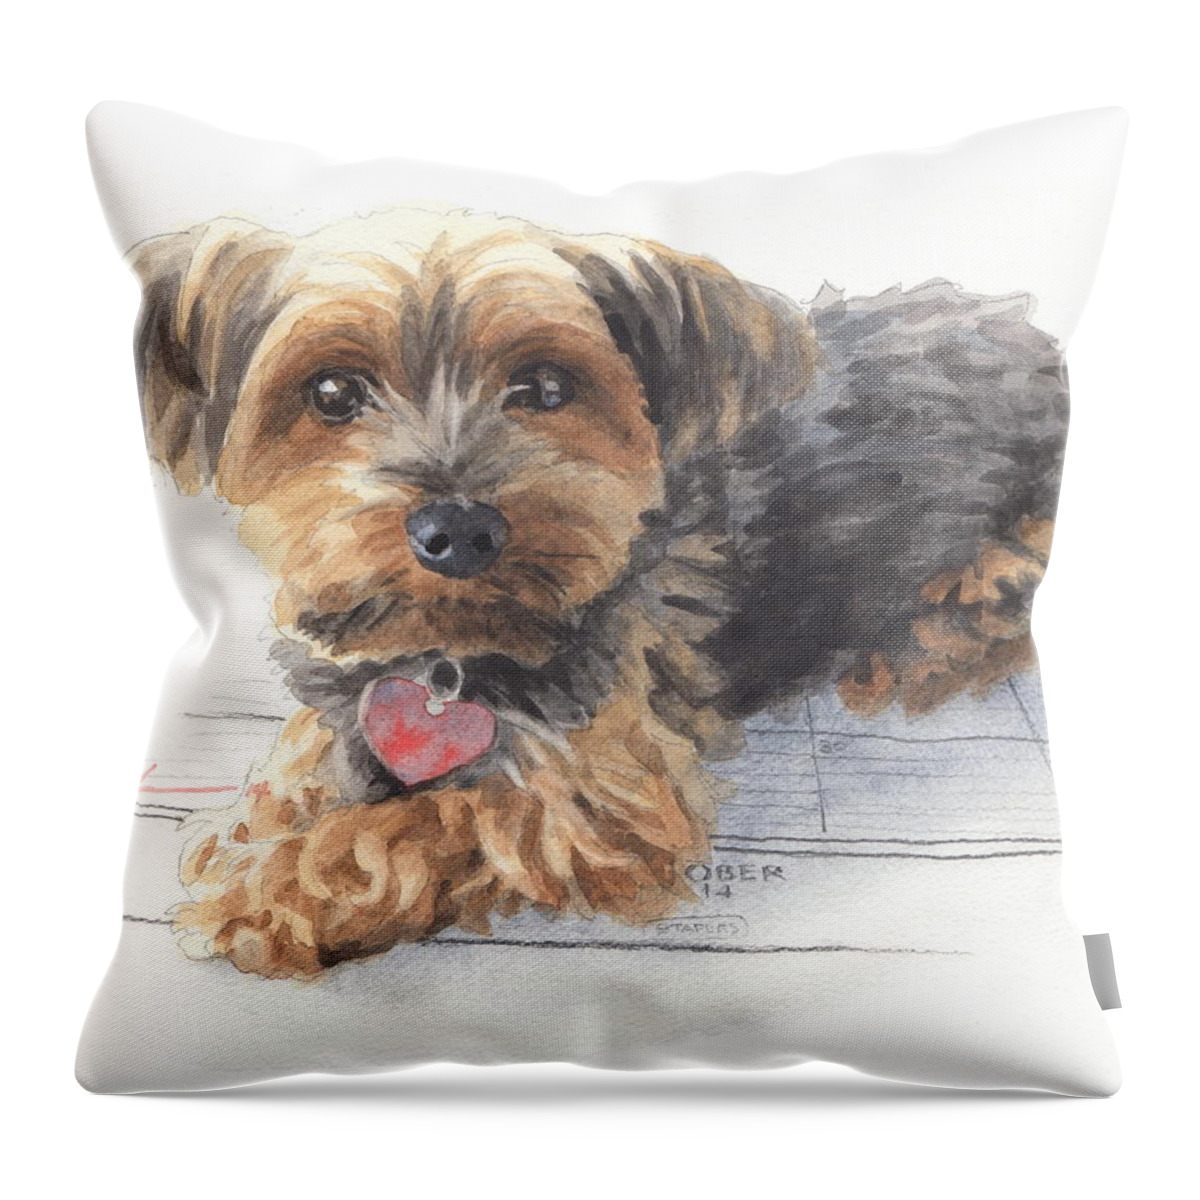 <a Href=http://miketheuer.com Target =_blank>www.miketheuer.com</a> Desktop Calendar Yorky Dog Watercolor Portrait Mike Theuer Throw Pillow featuring the drawing Desktop Calendar Yorky Dog Watercolor Portrait by Mike Theuer